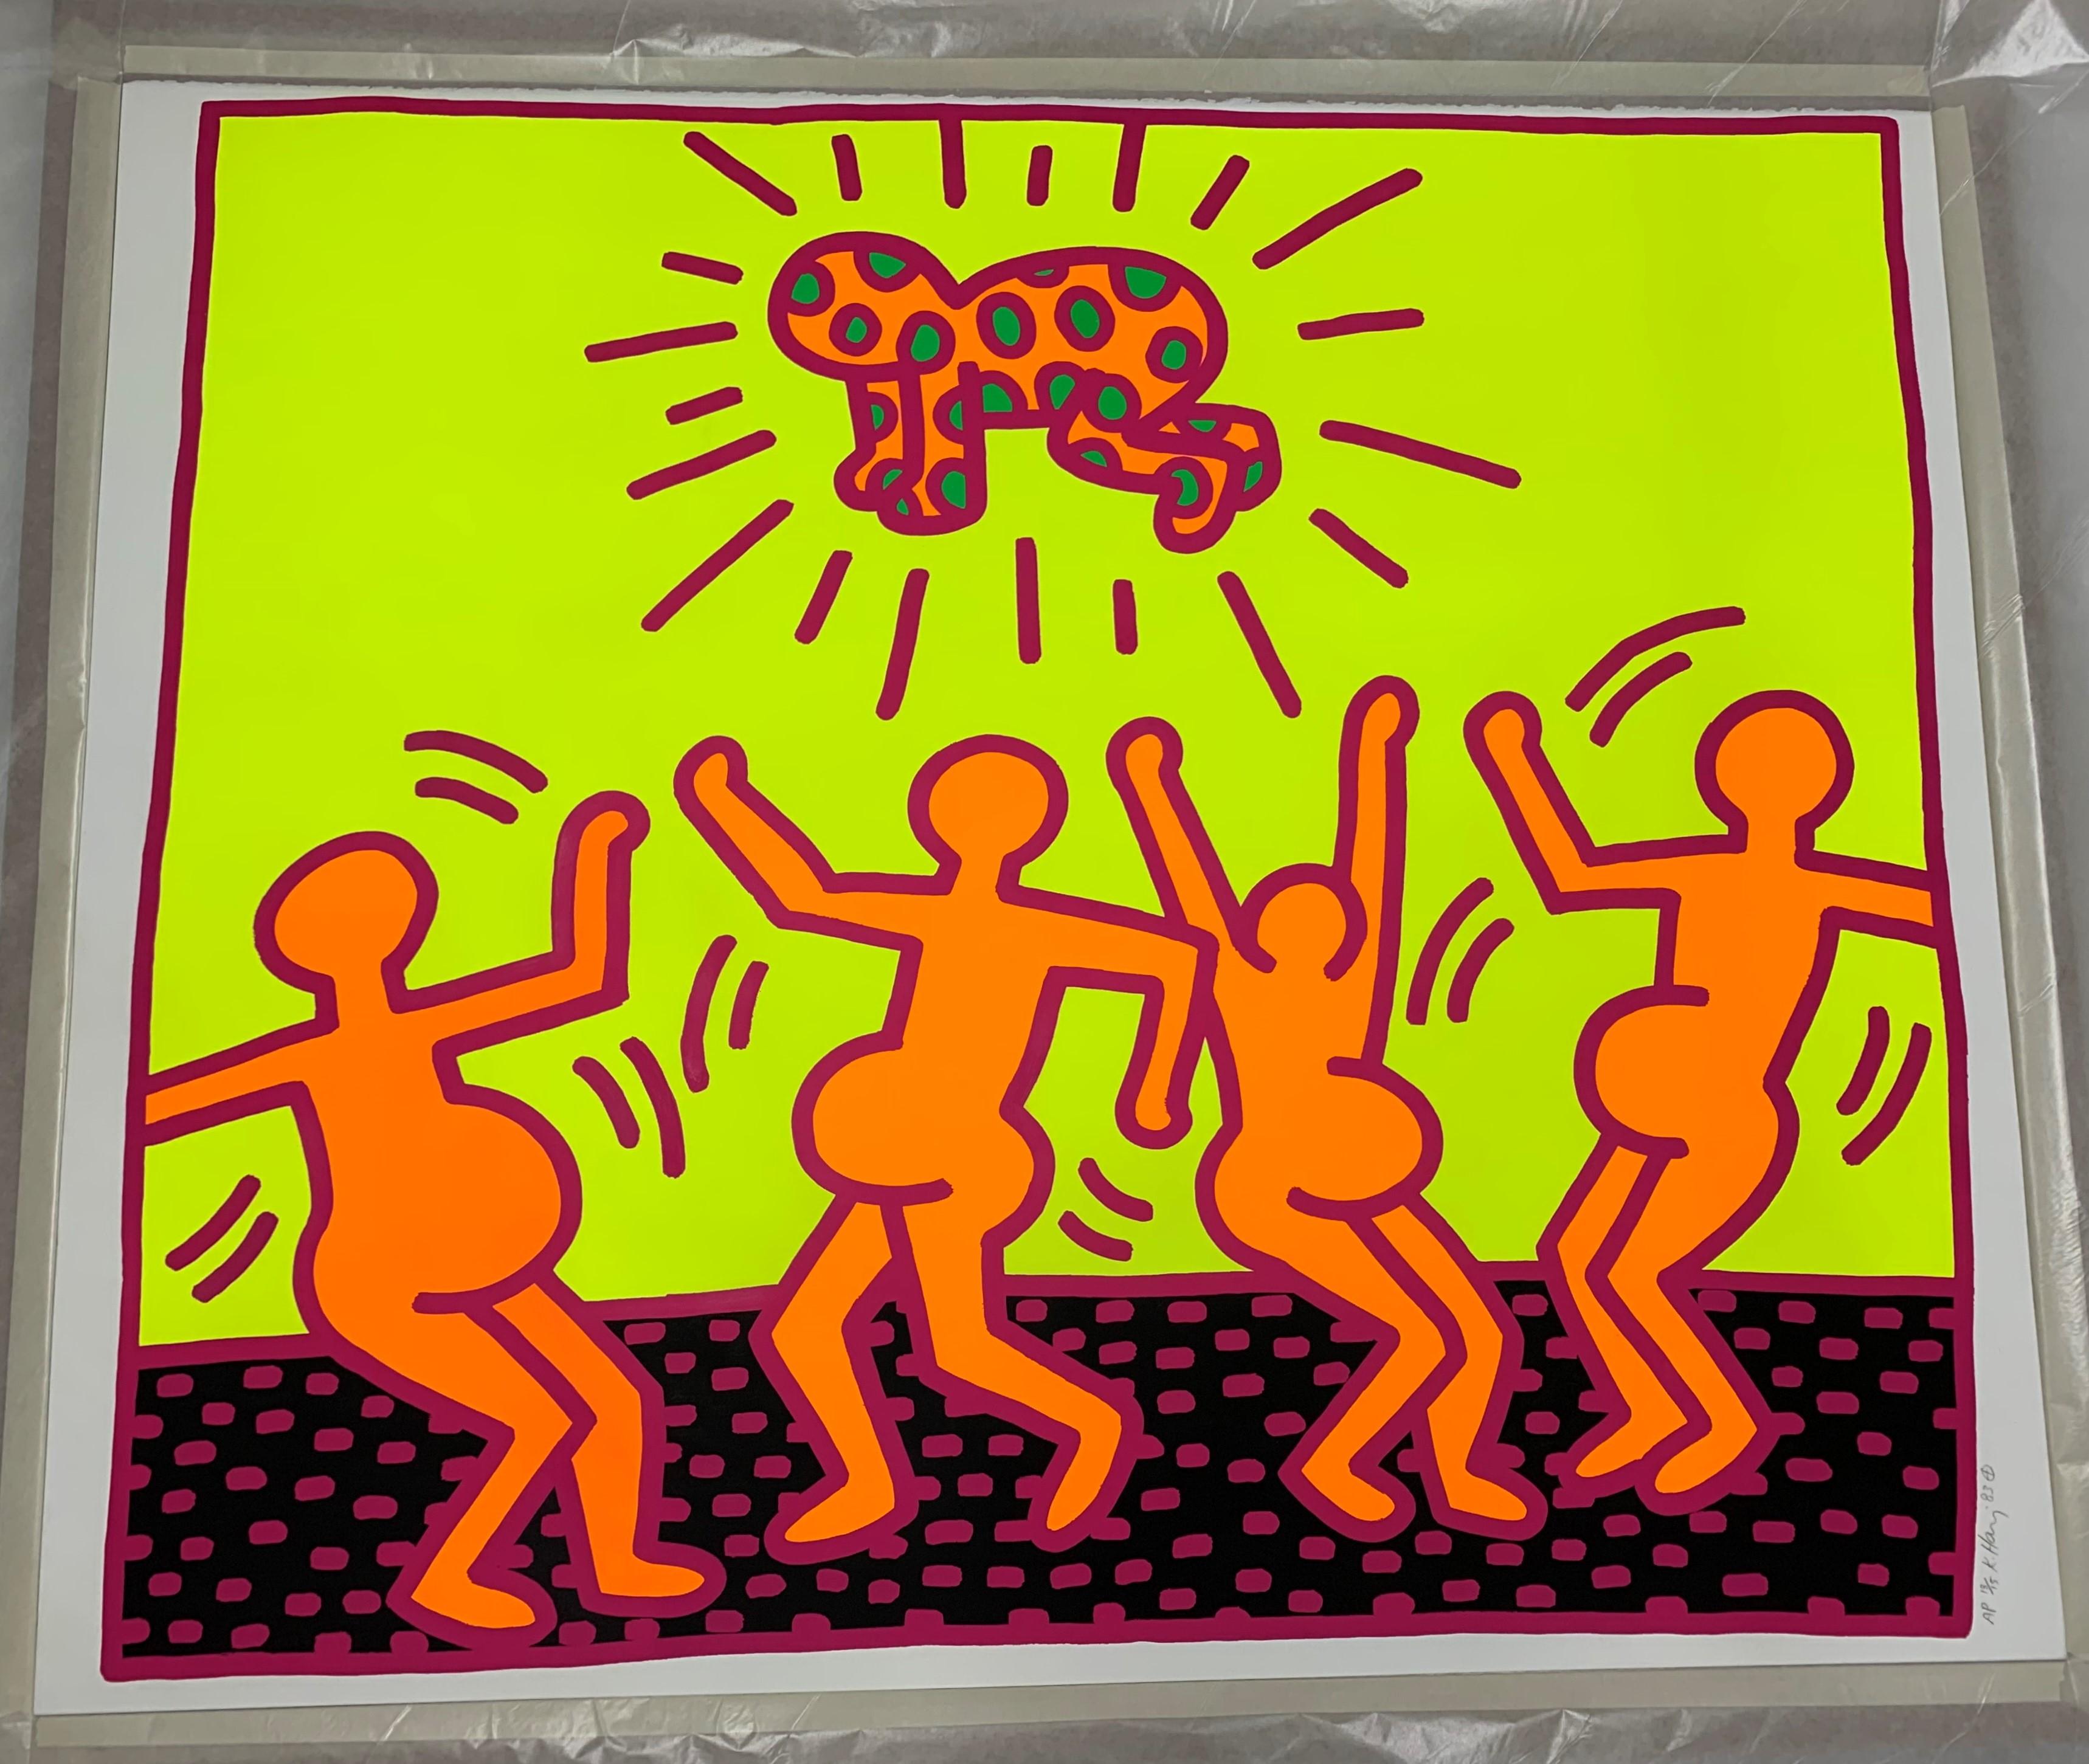 Plate 1 from Fertility Suite  - Print by Keith Haring